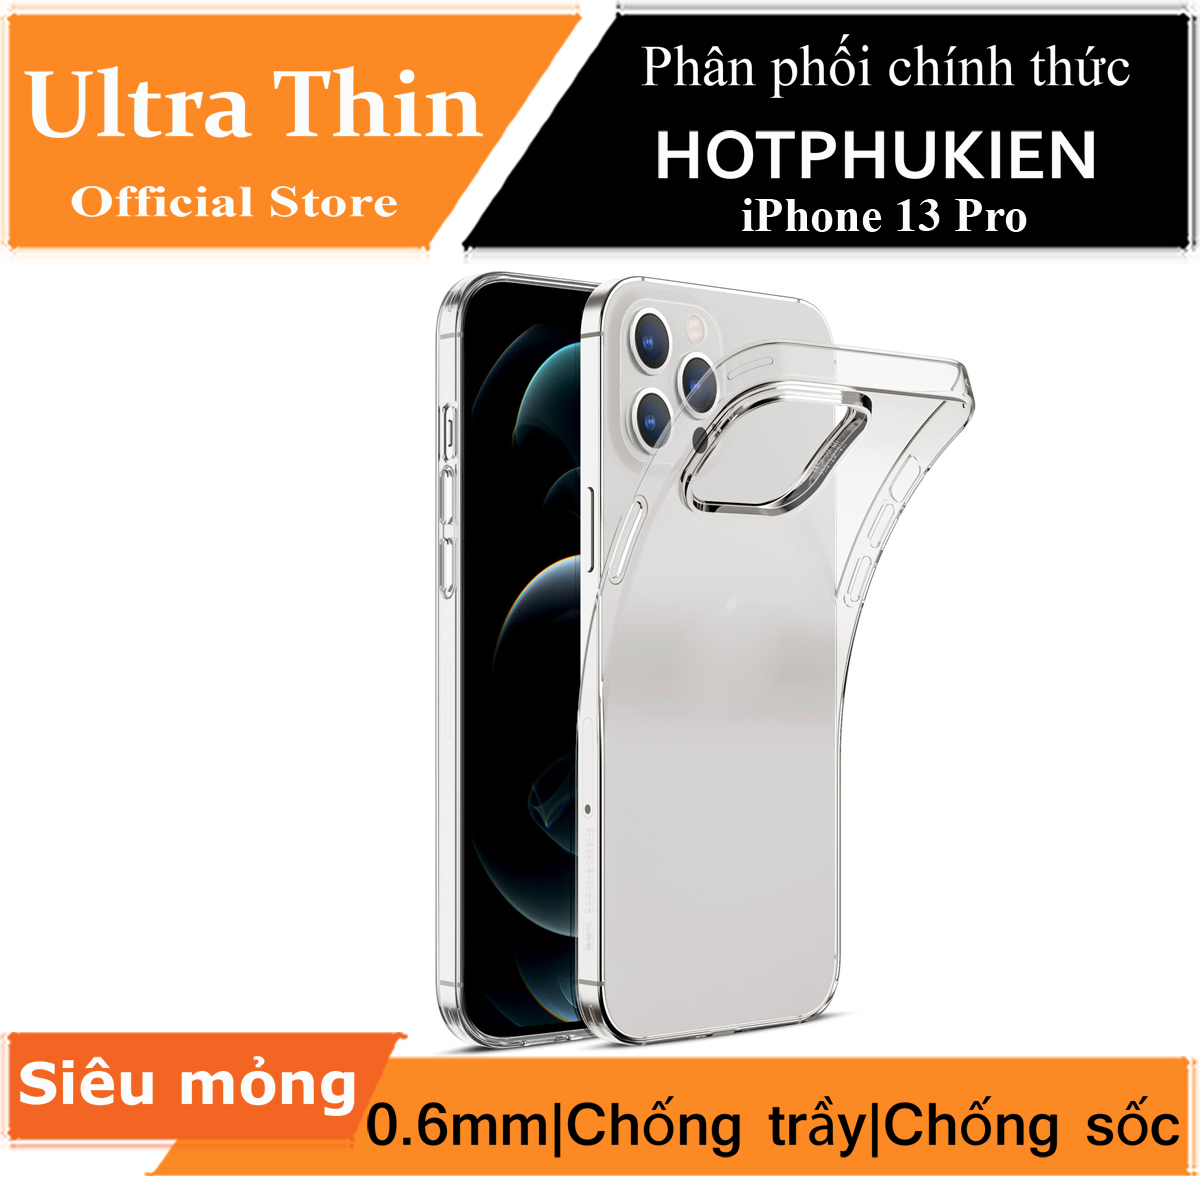 Ốp lưng dẻo silicon trong suốt cho iPhone 13 Pro hiệu Ultra Thin